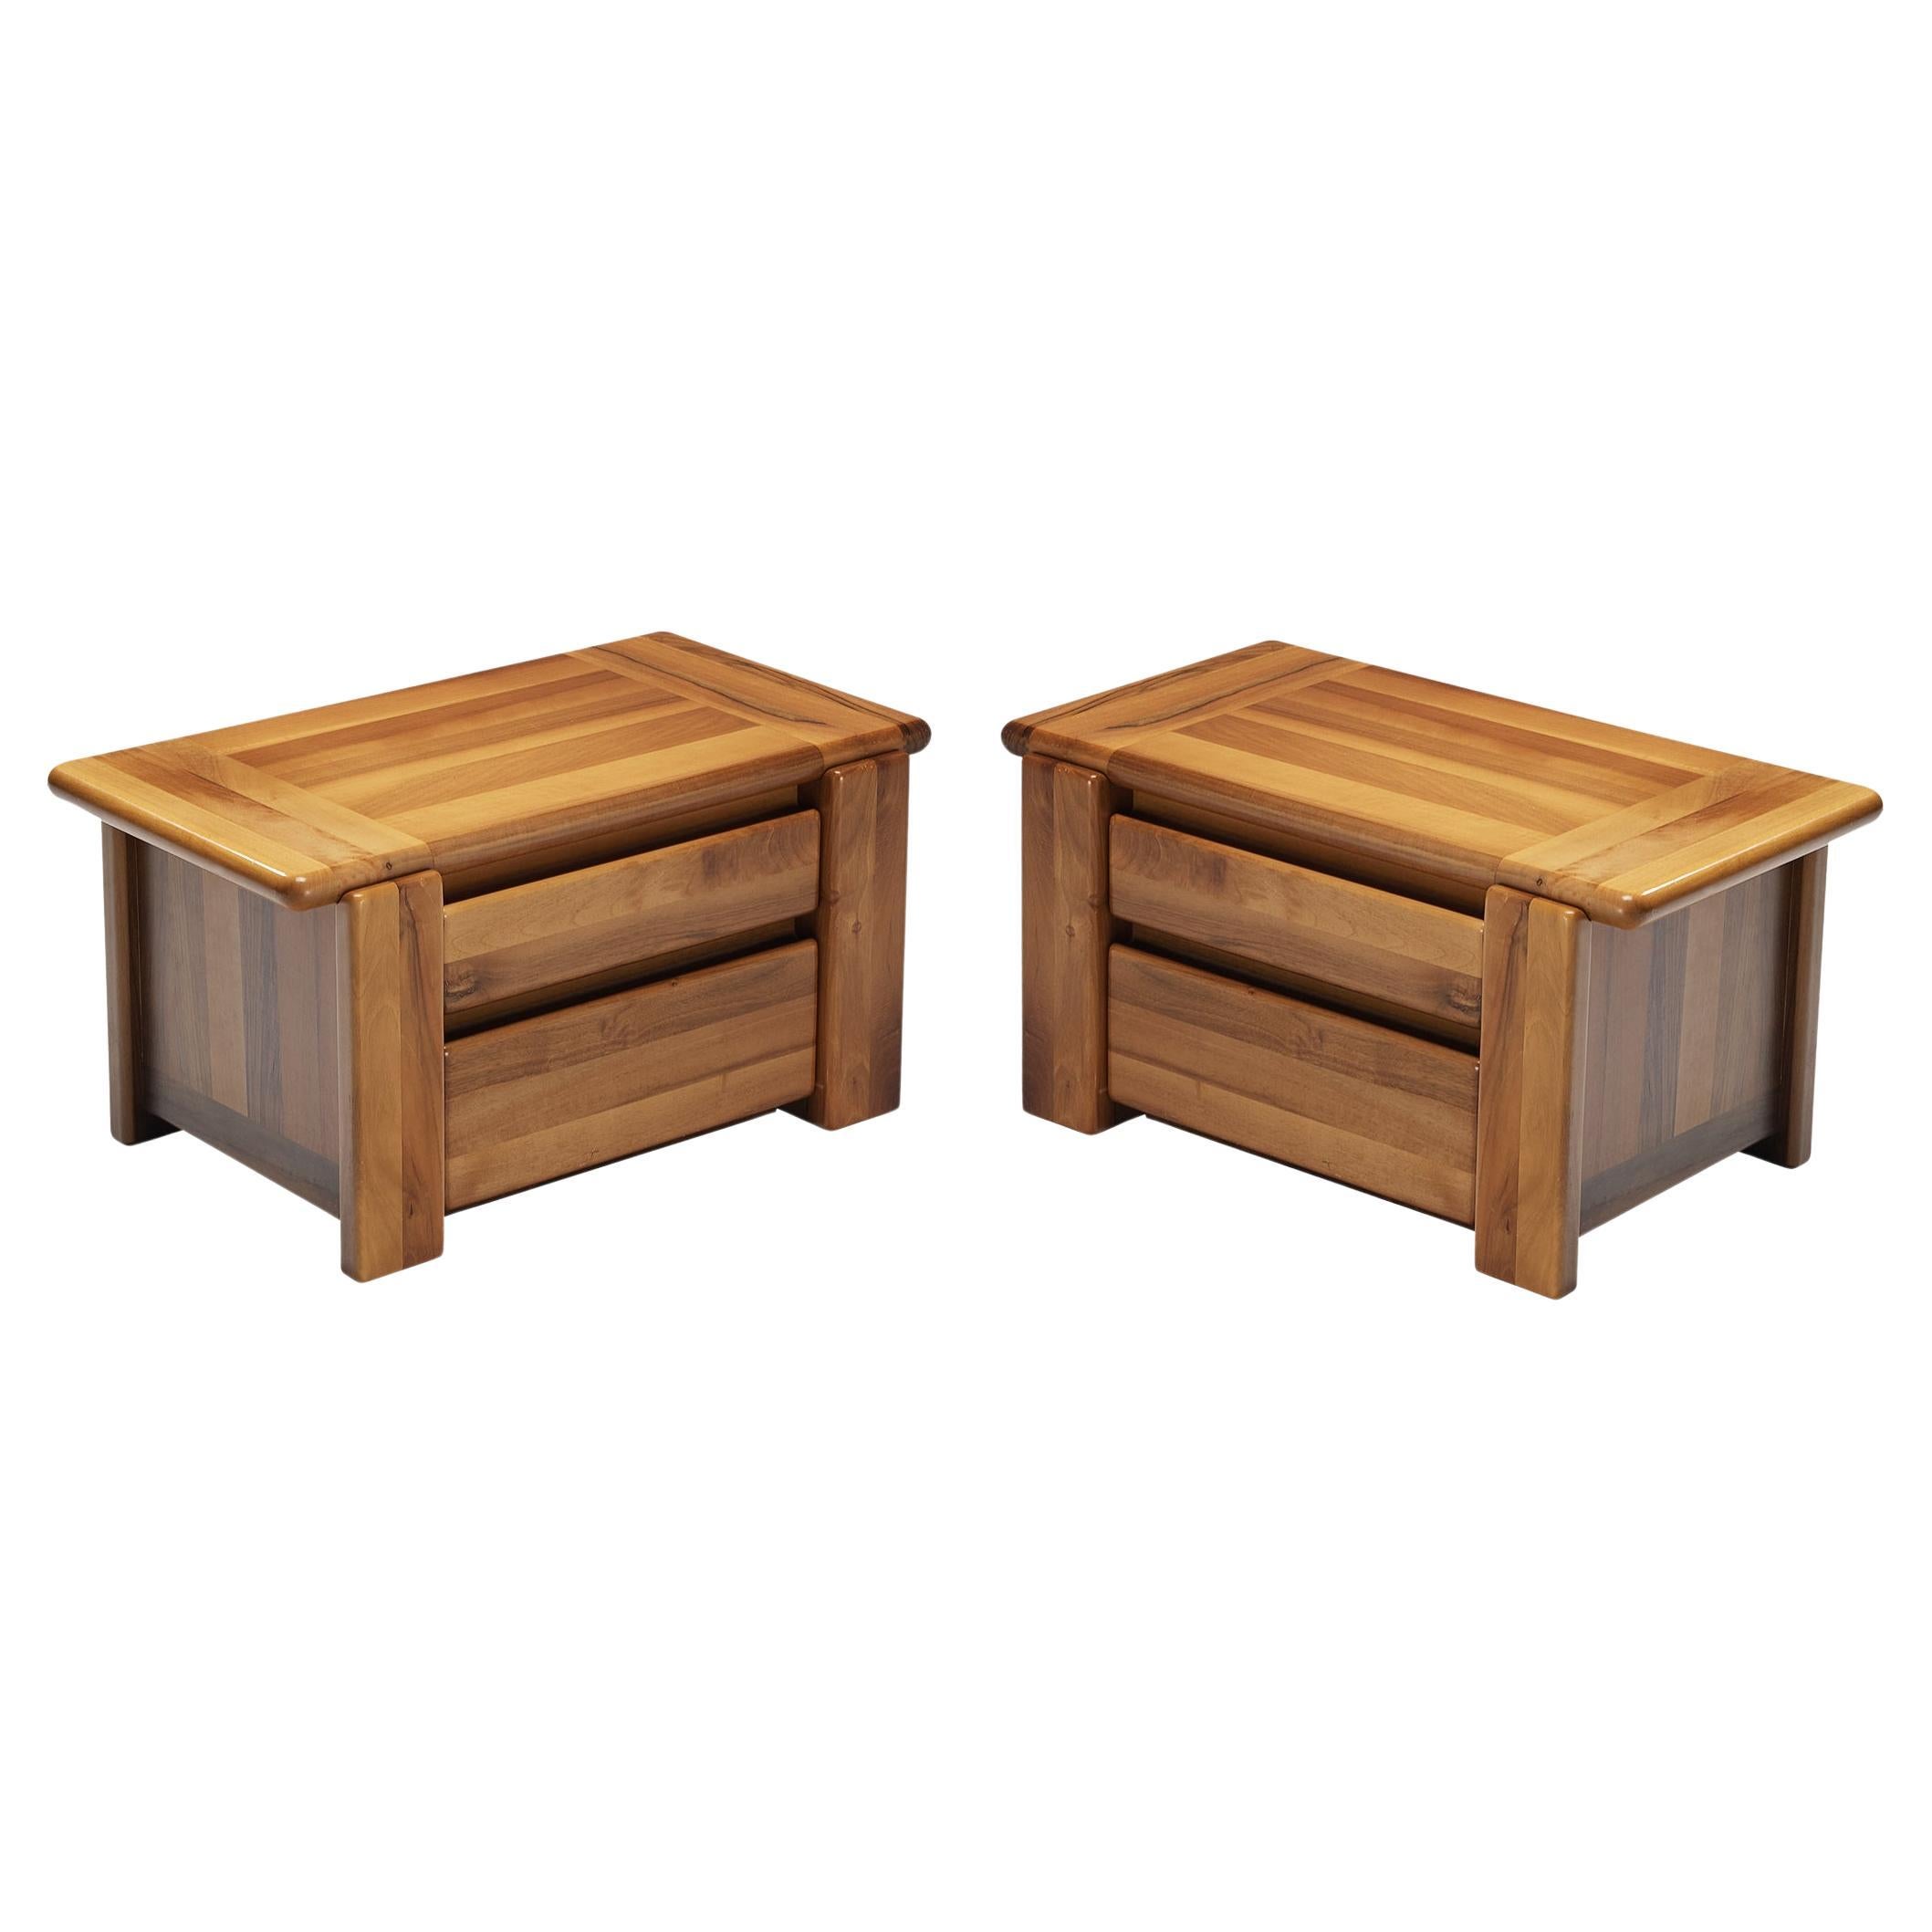 Mario Marenco for Mobil Girgi Pair of Nightstands in Walnut  For Sale